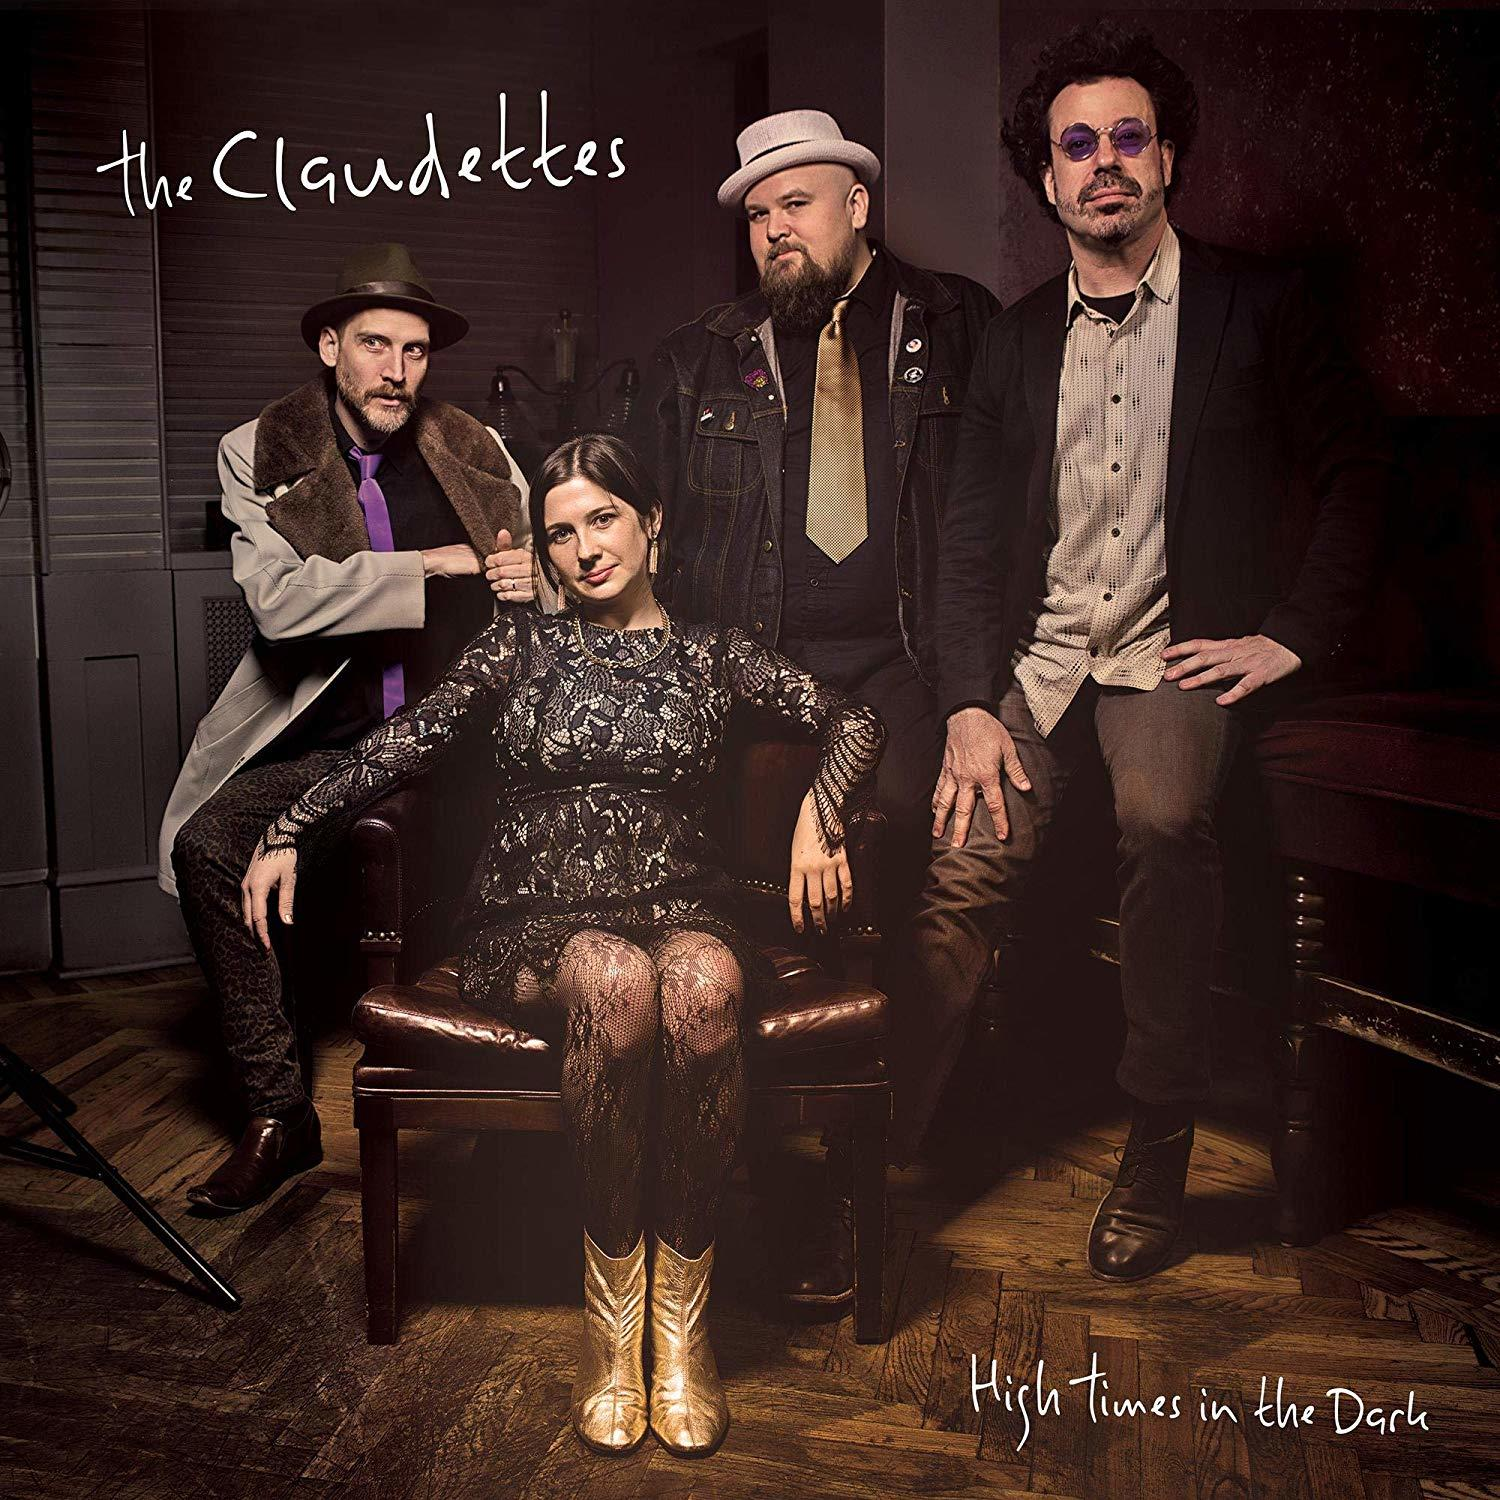 The Times (Vinyl) - Claudettes The In Dark - High